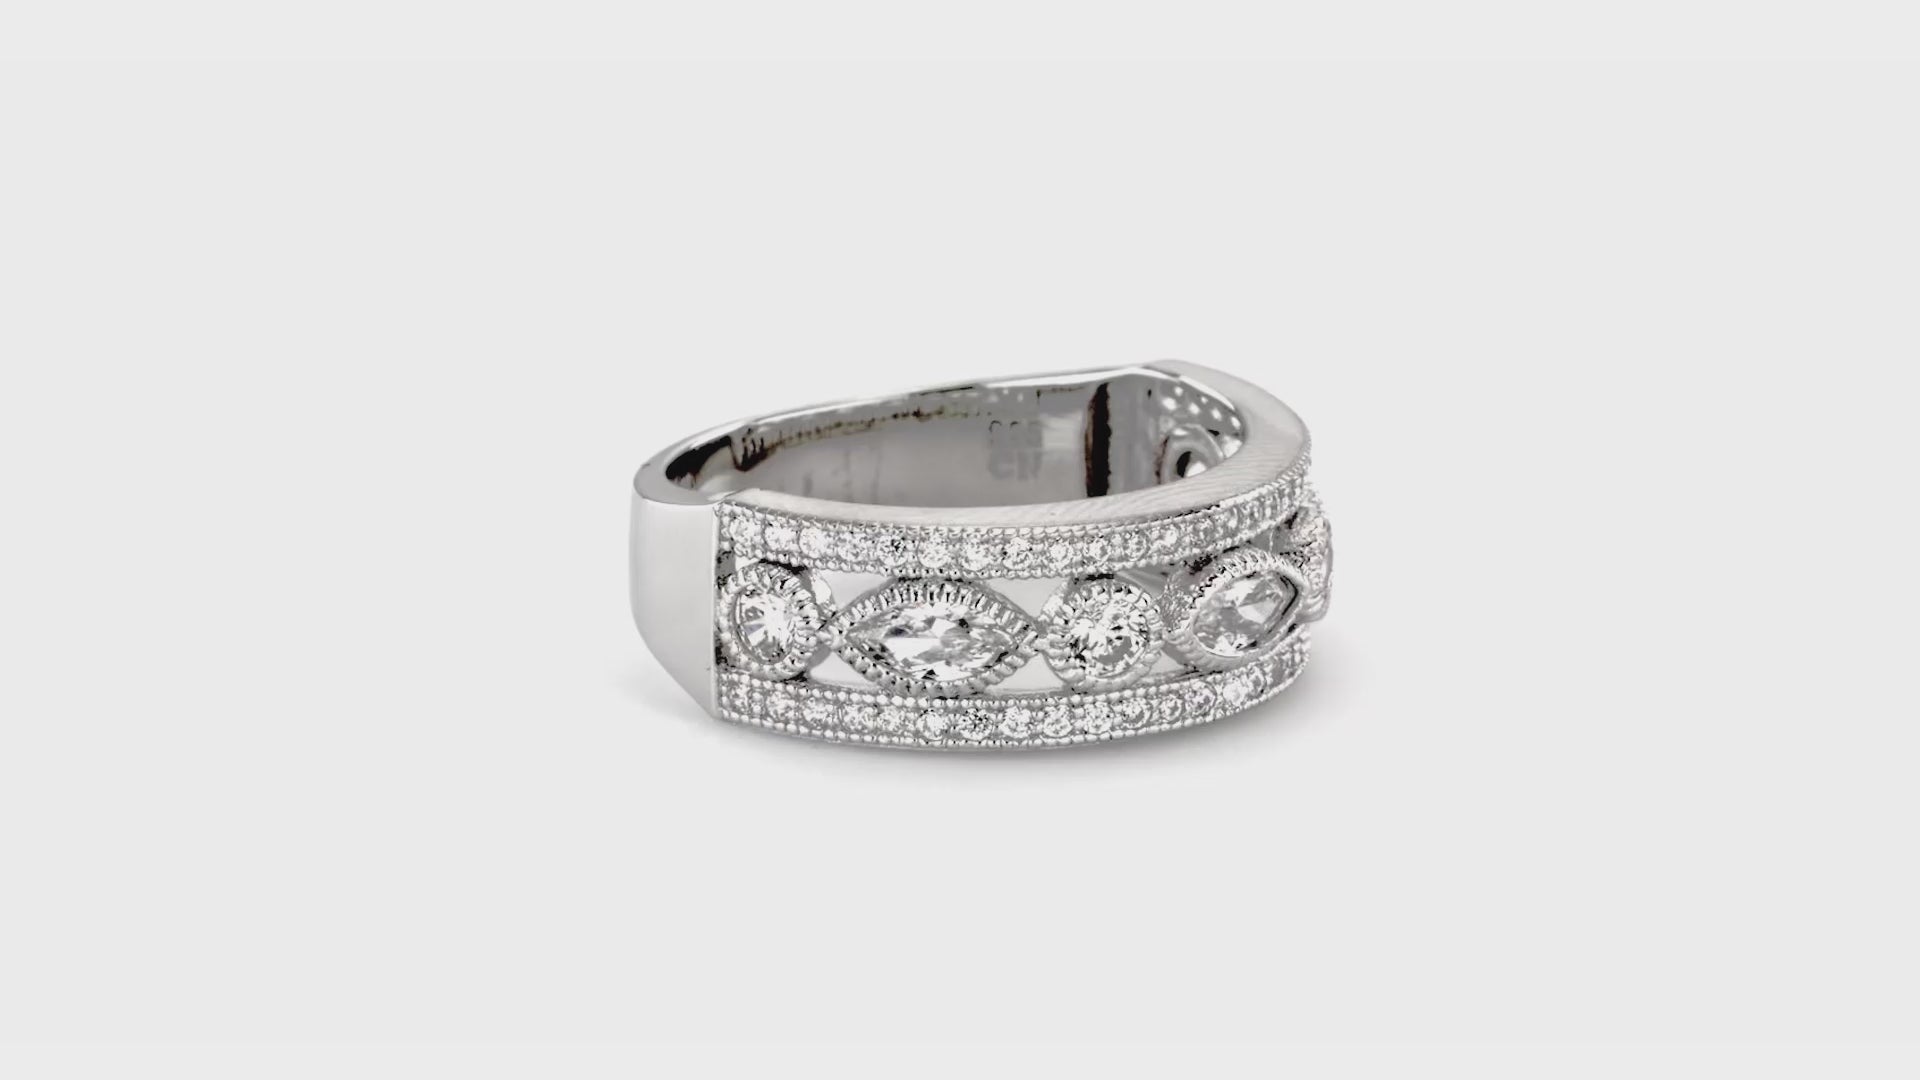 Video Contains Art Deco Milgrain Bezel Set CZ Half Eternity Ring in Sterling Silver. Style Number R849-01